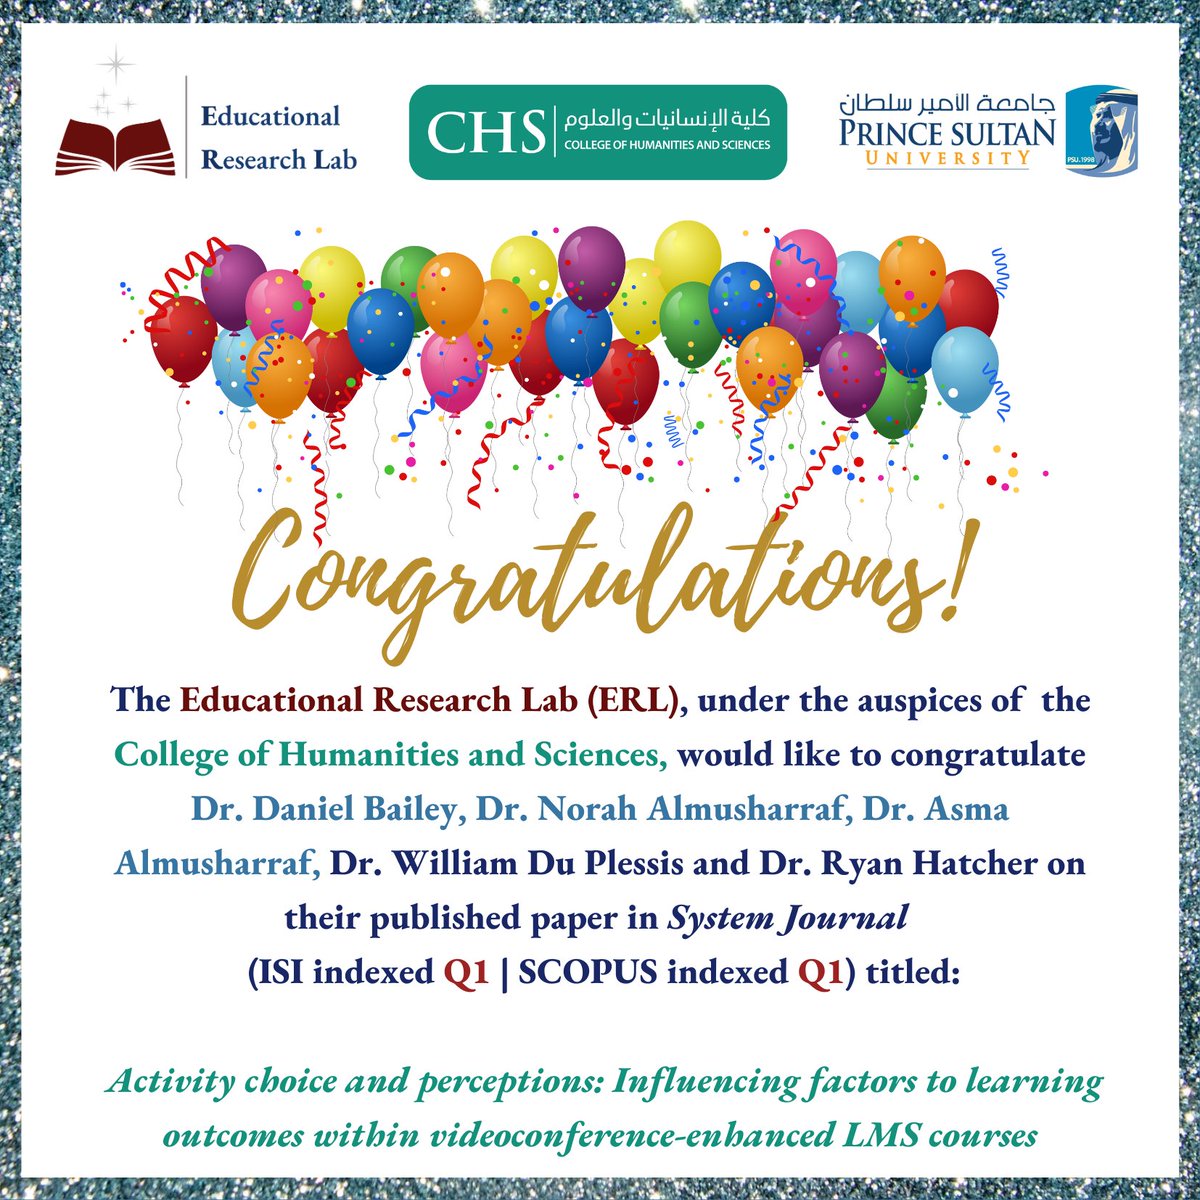 The ERL congratulates Dr. Daniel Bailey, Dr. Norah Almusharraf, Dr. Asma Almusharraf, Dr. William Du Plessis and Dr. Ryan Hatcher on their publication, titled: 
Activity choice and perceptions: Influencing factors to learning outcomes within videoconference-enhanced LMS courses✨